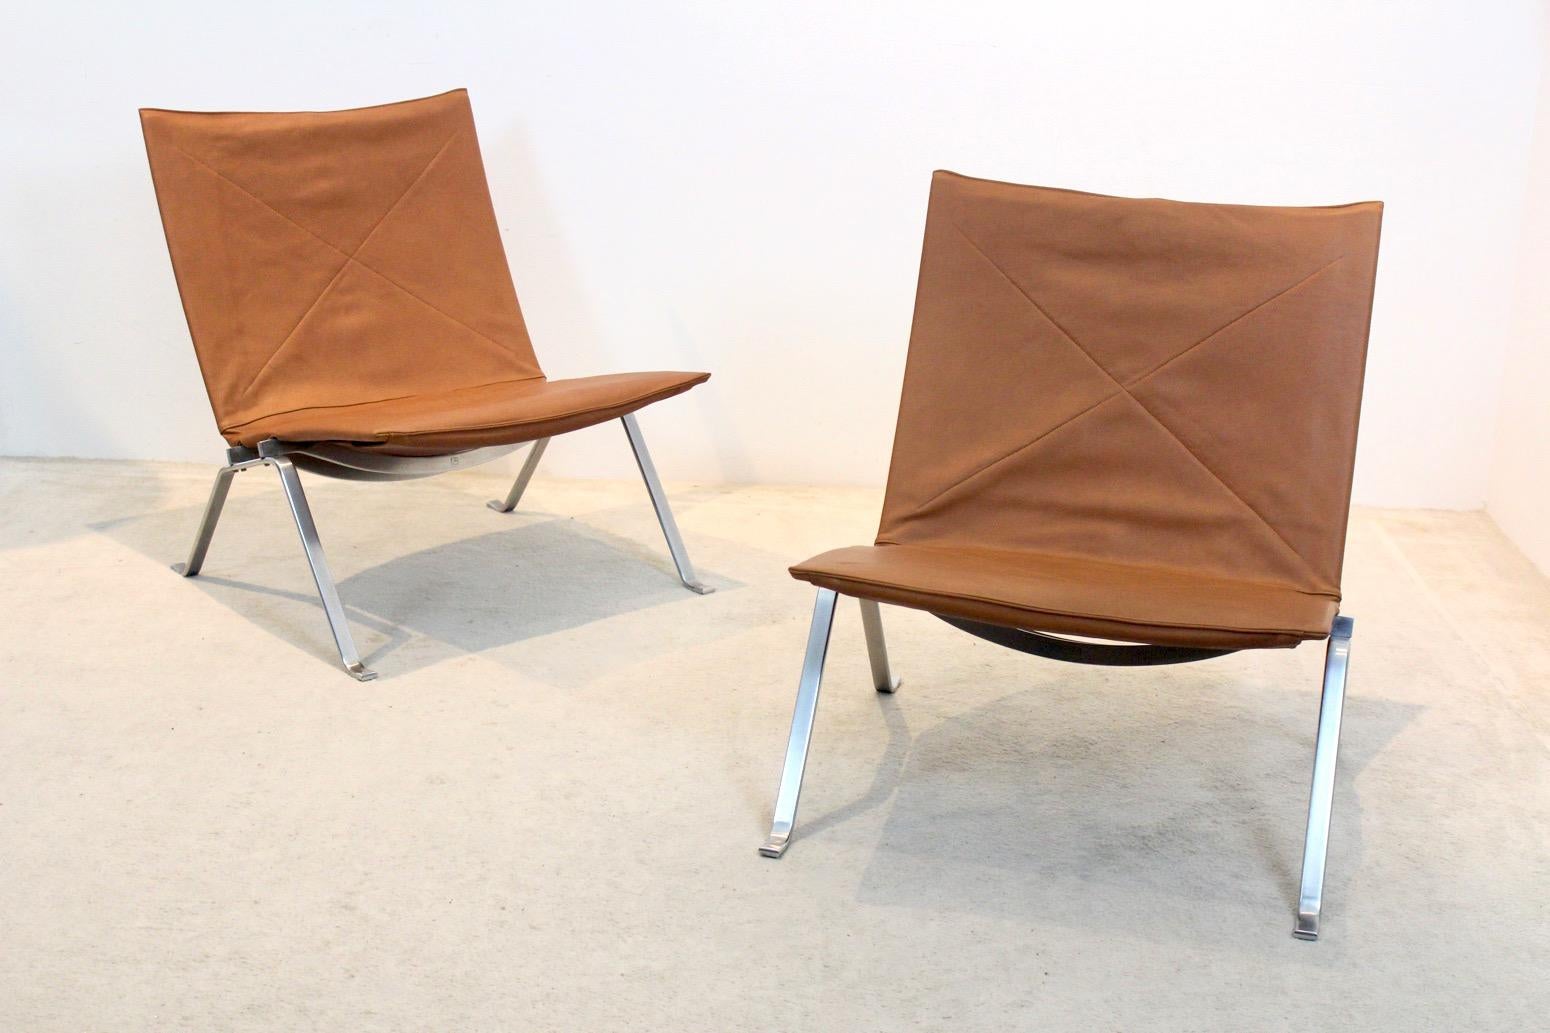 20th Century Exquisite Cognac Leather PK22 chairs by Poul Kjærholm for E. Kold Christensen For Sale